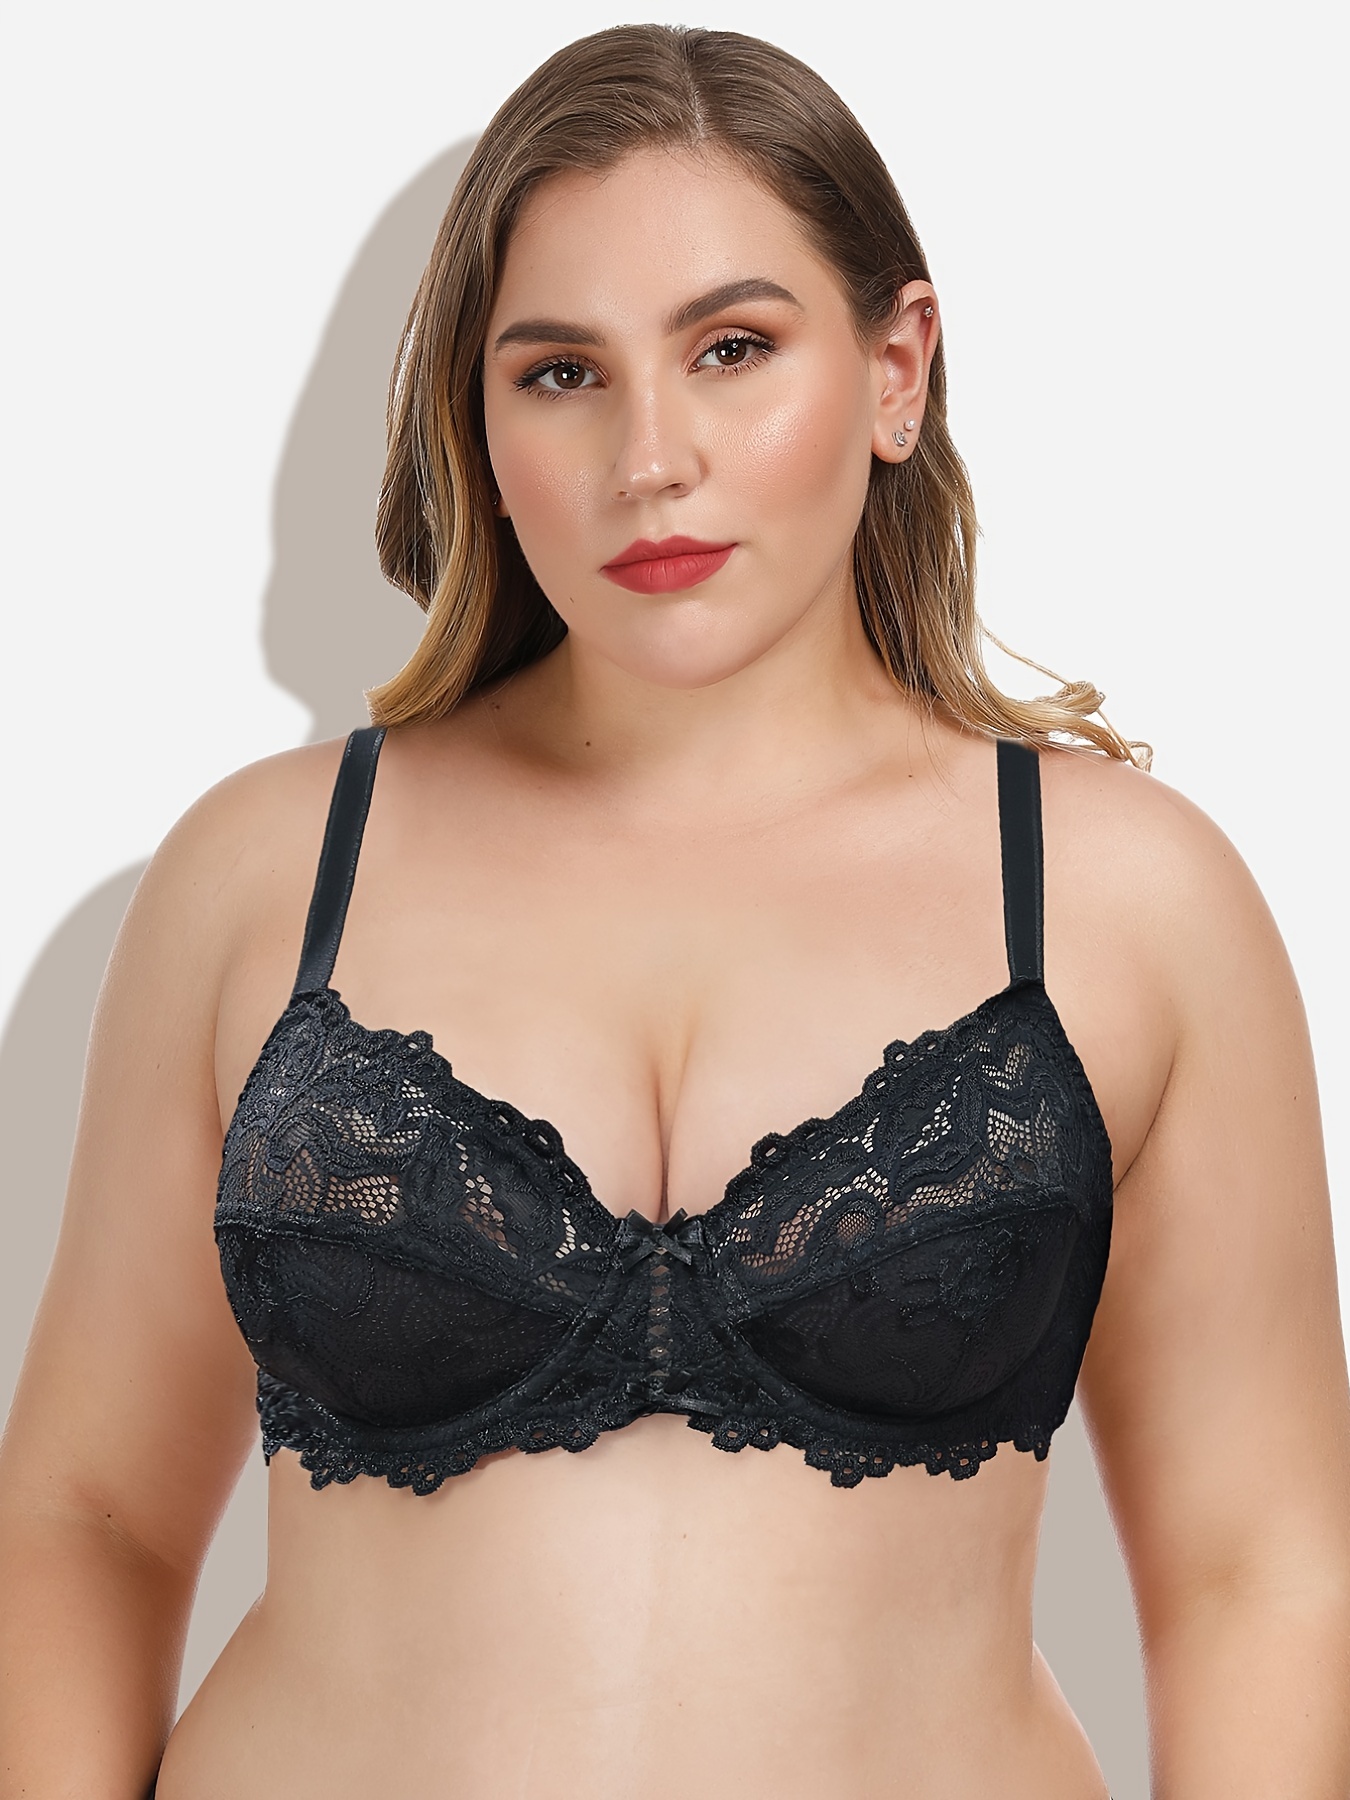 WQJNWEQ Clearance Lady'S Padded Bralette Plus Size Lace Sexy